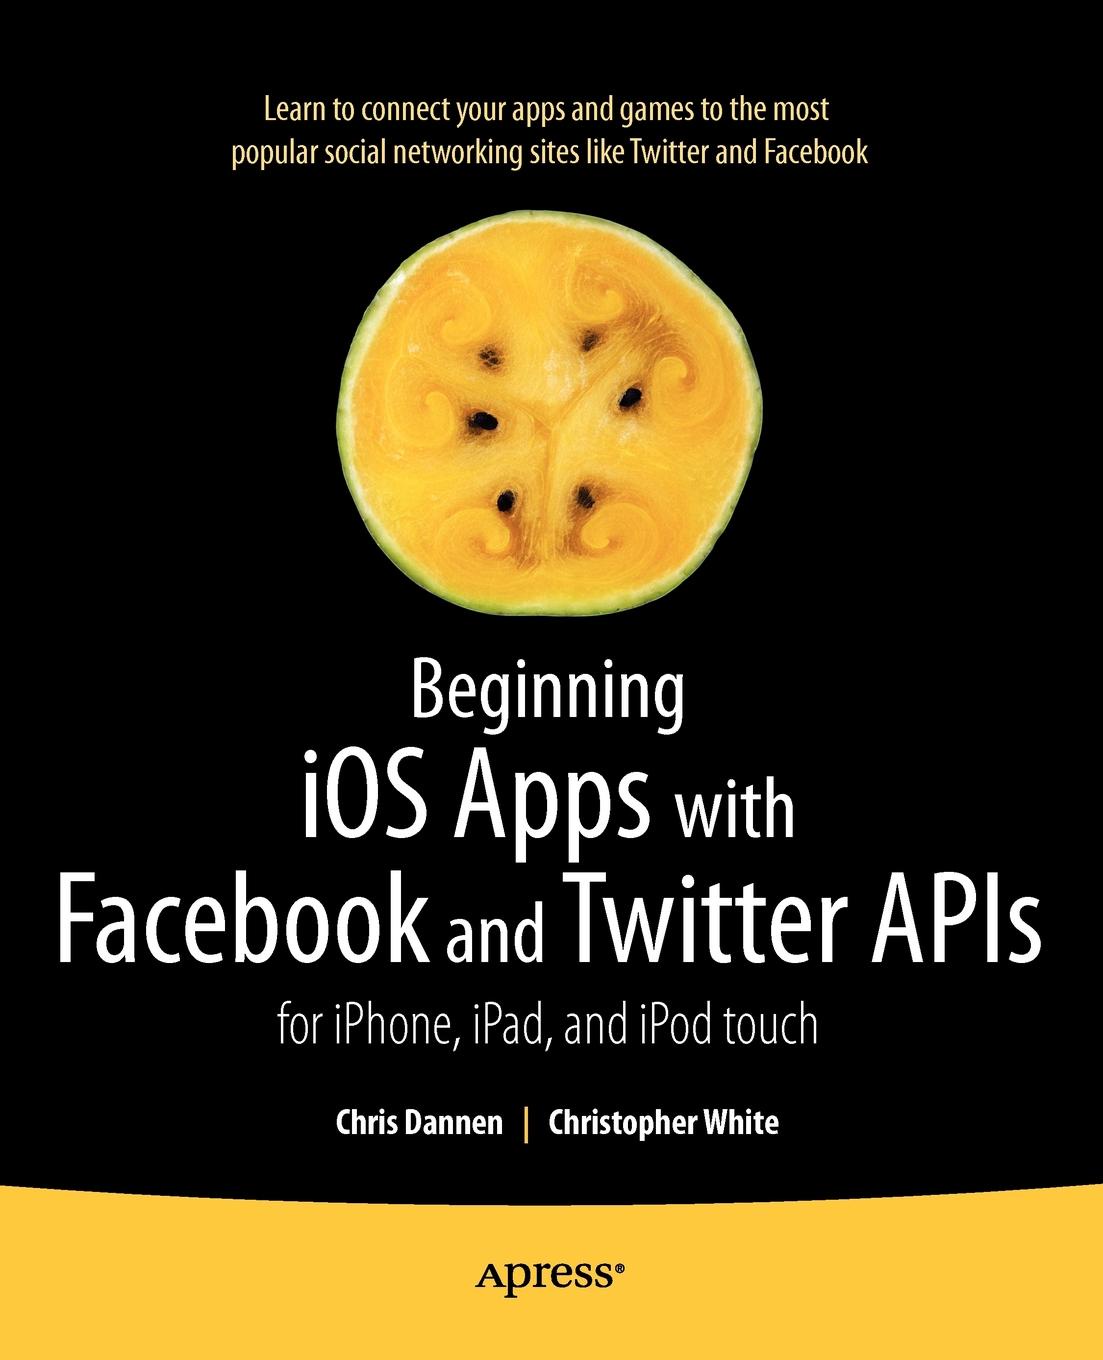 Beginning IOS Apps with Facebook and Twitter APIs. For iPhone, iPad, and iPod Touch